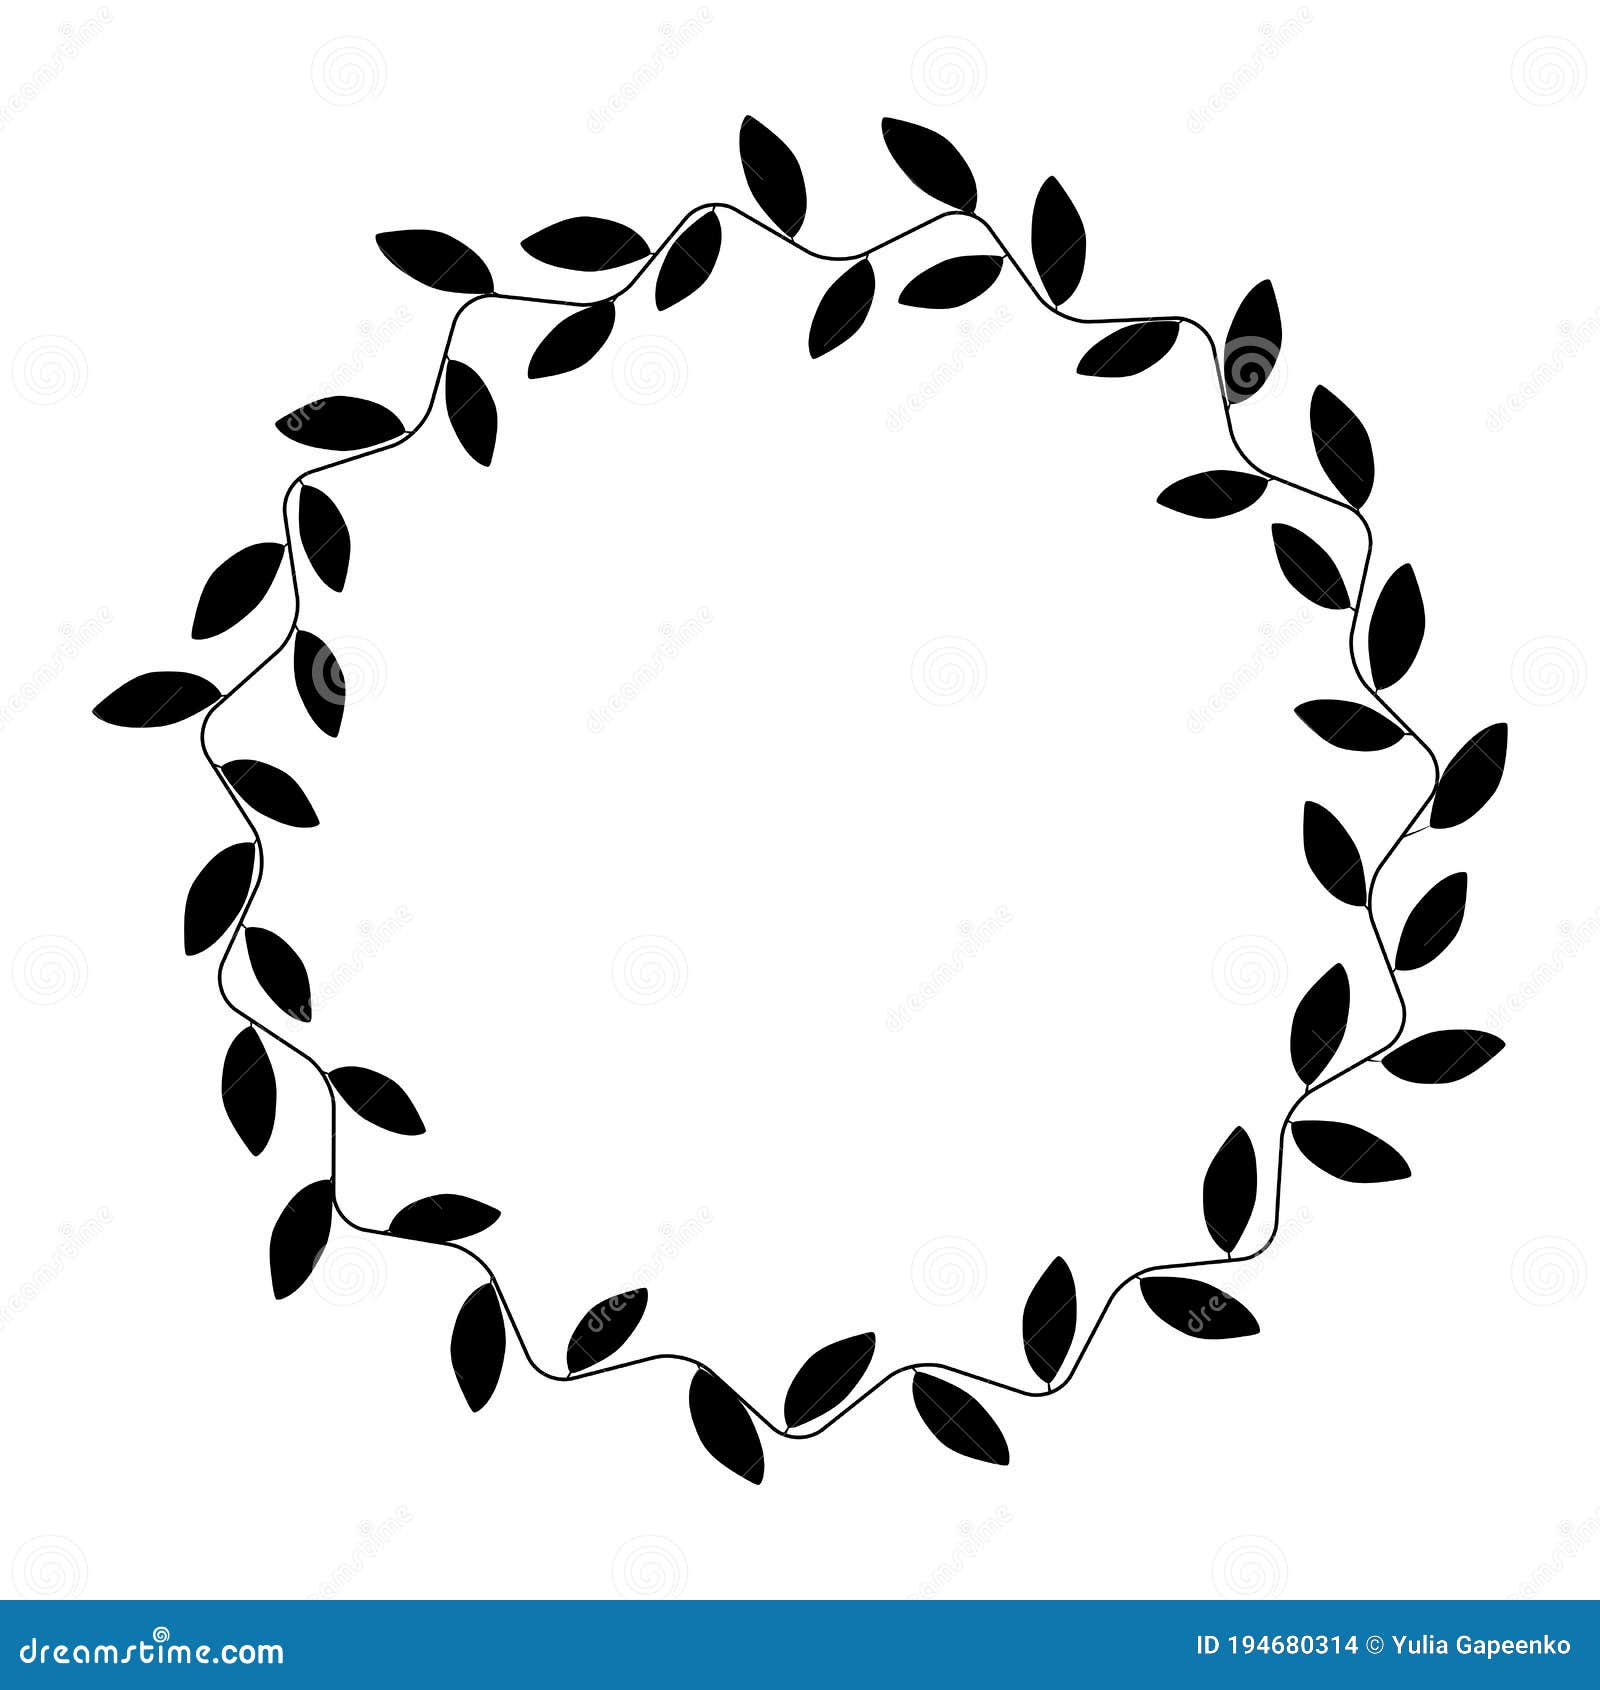 Laurel Wreath Silhouette Isolated on White Background. Vector ...